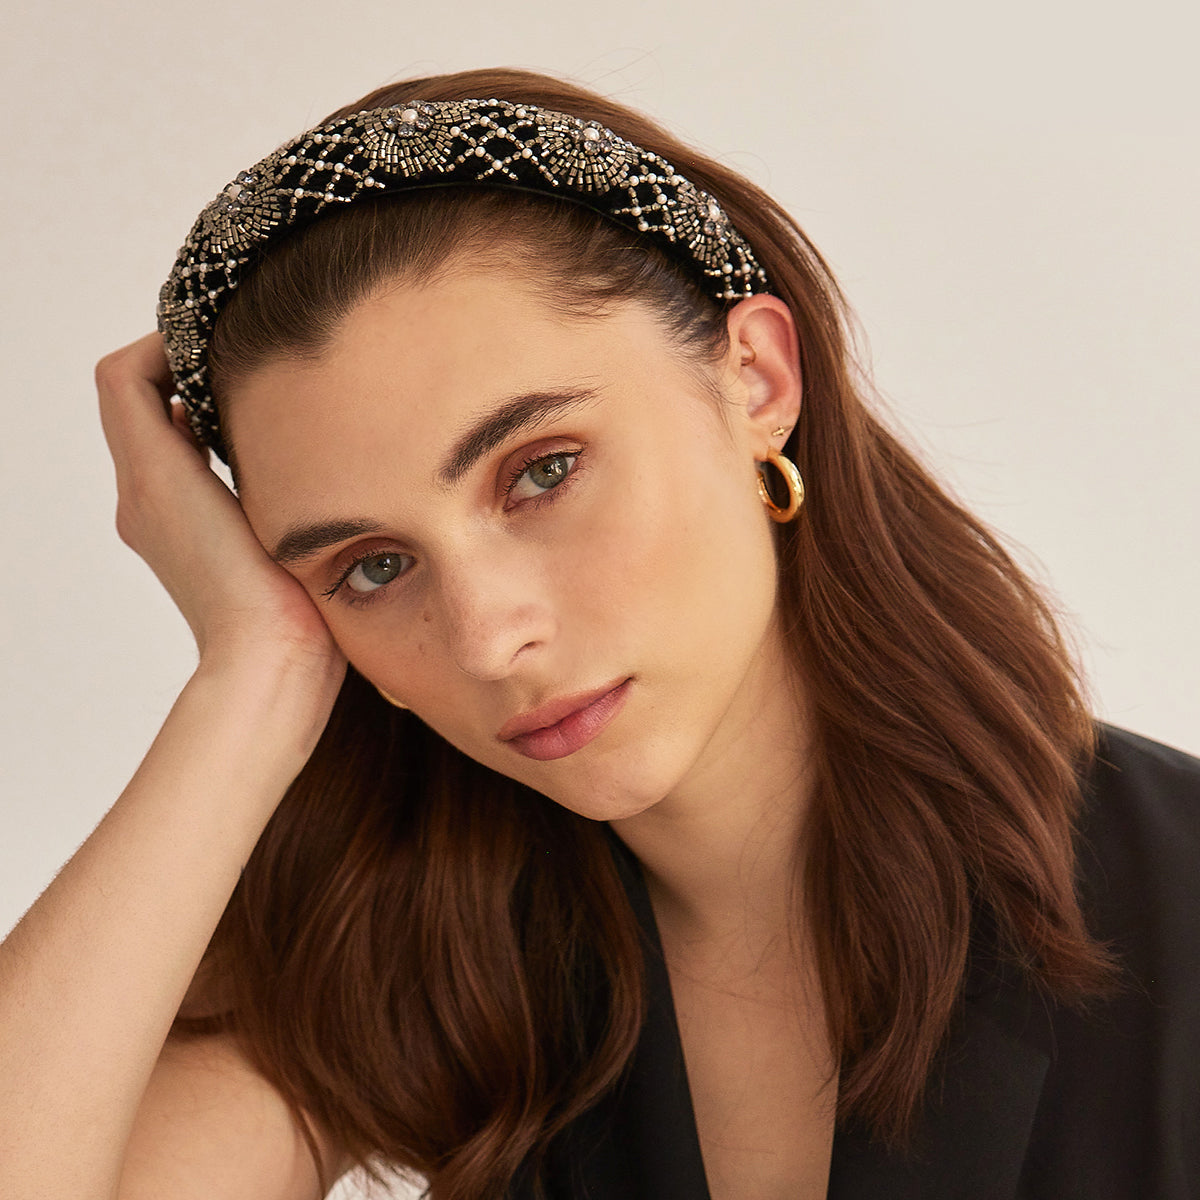 Headbands are perfect gifts for women - on sale now 30% off!